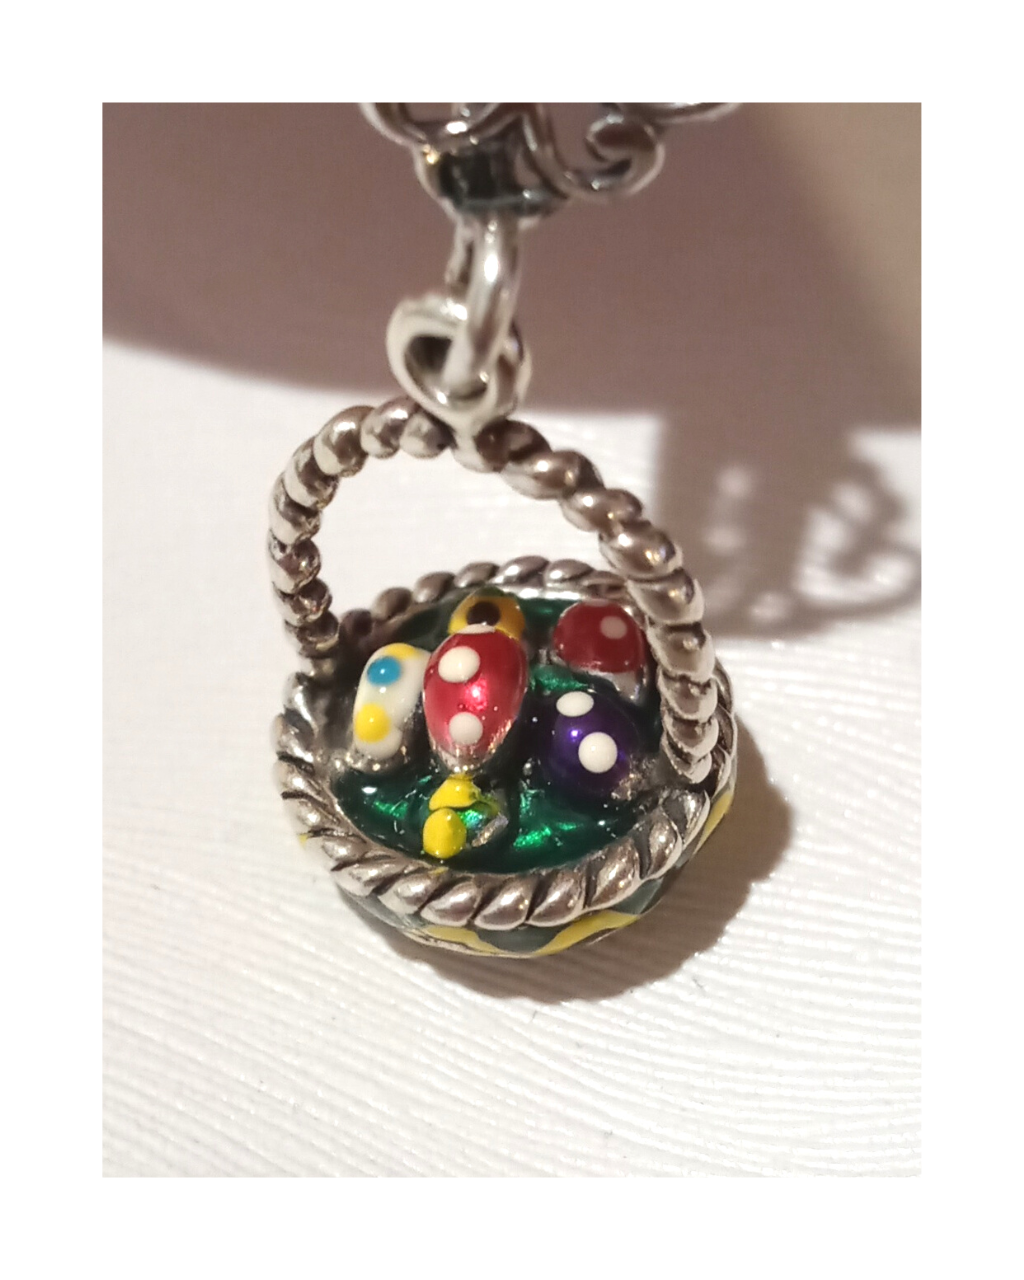 Exclusive Amazing Sterling Hand-enameled Wearable Art 3-D Easter Basket with Enamel Eggs Inside Basket Removable Pendant on 18" Box Chain